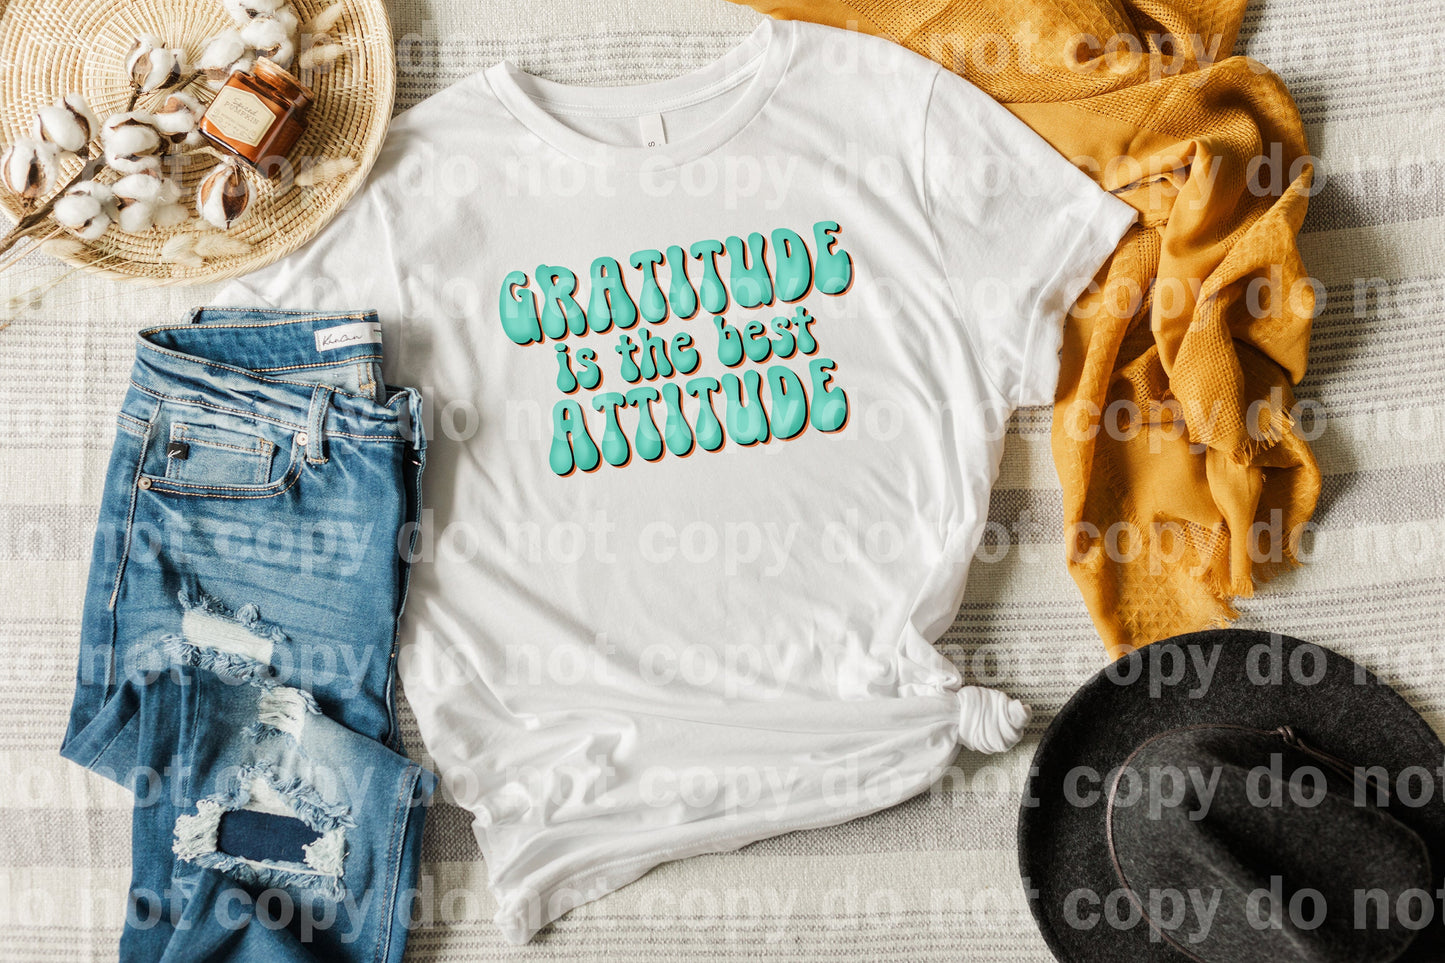 Gratitude Is The Best Attitude Typography Dream Print or Sublimation Print